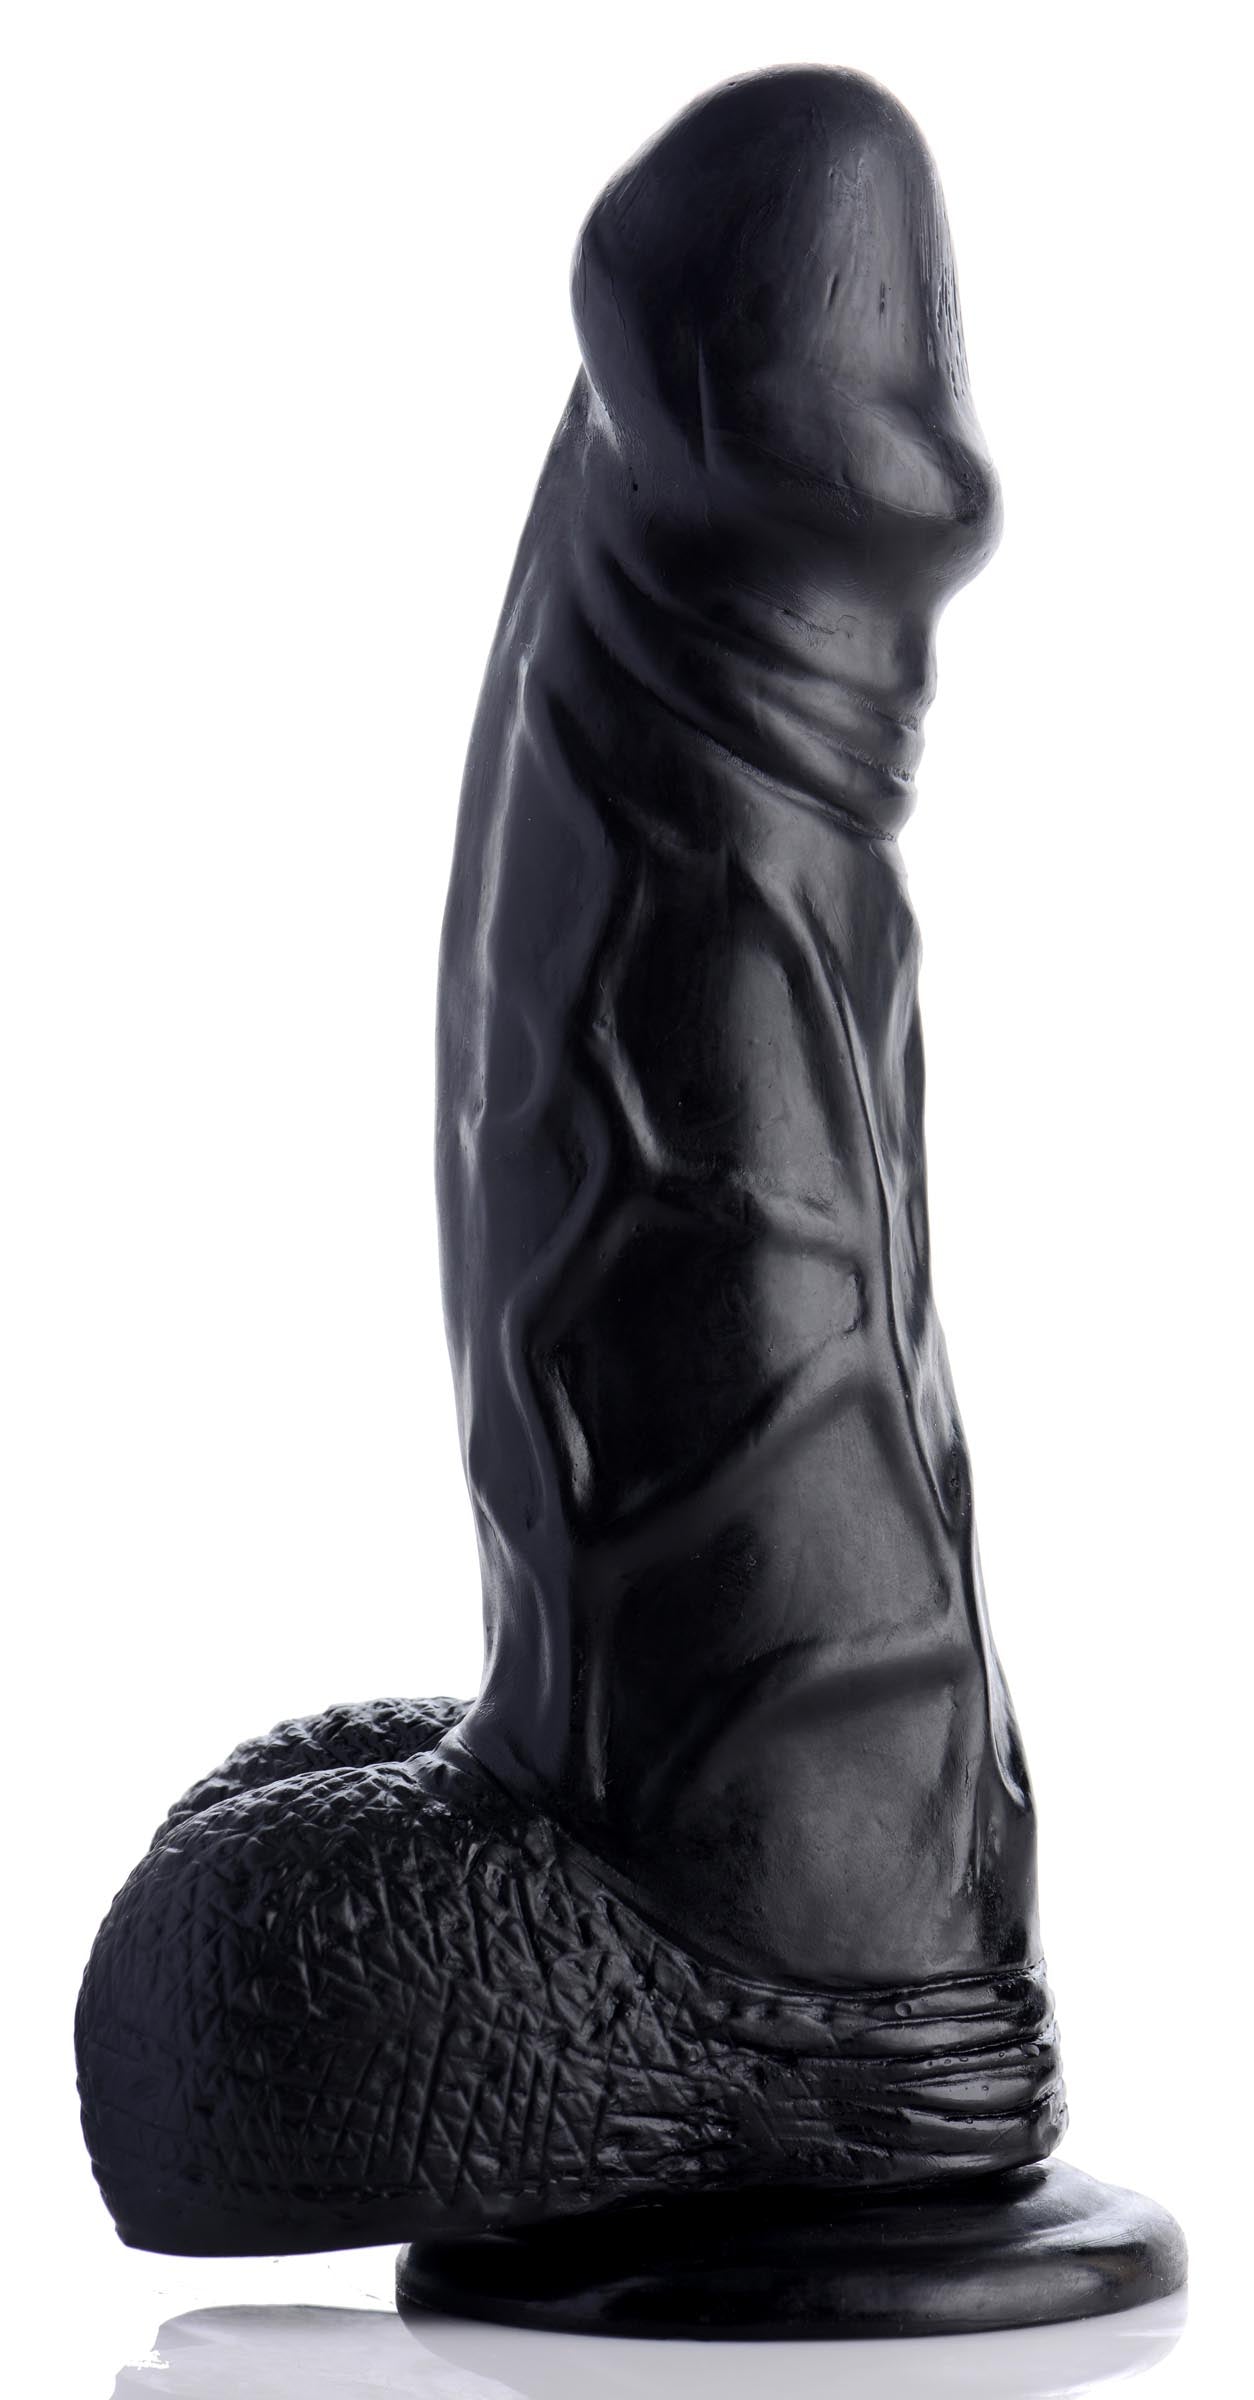 6.5 Inch Realistic Suction Cup Dildo